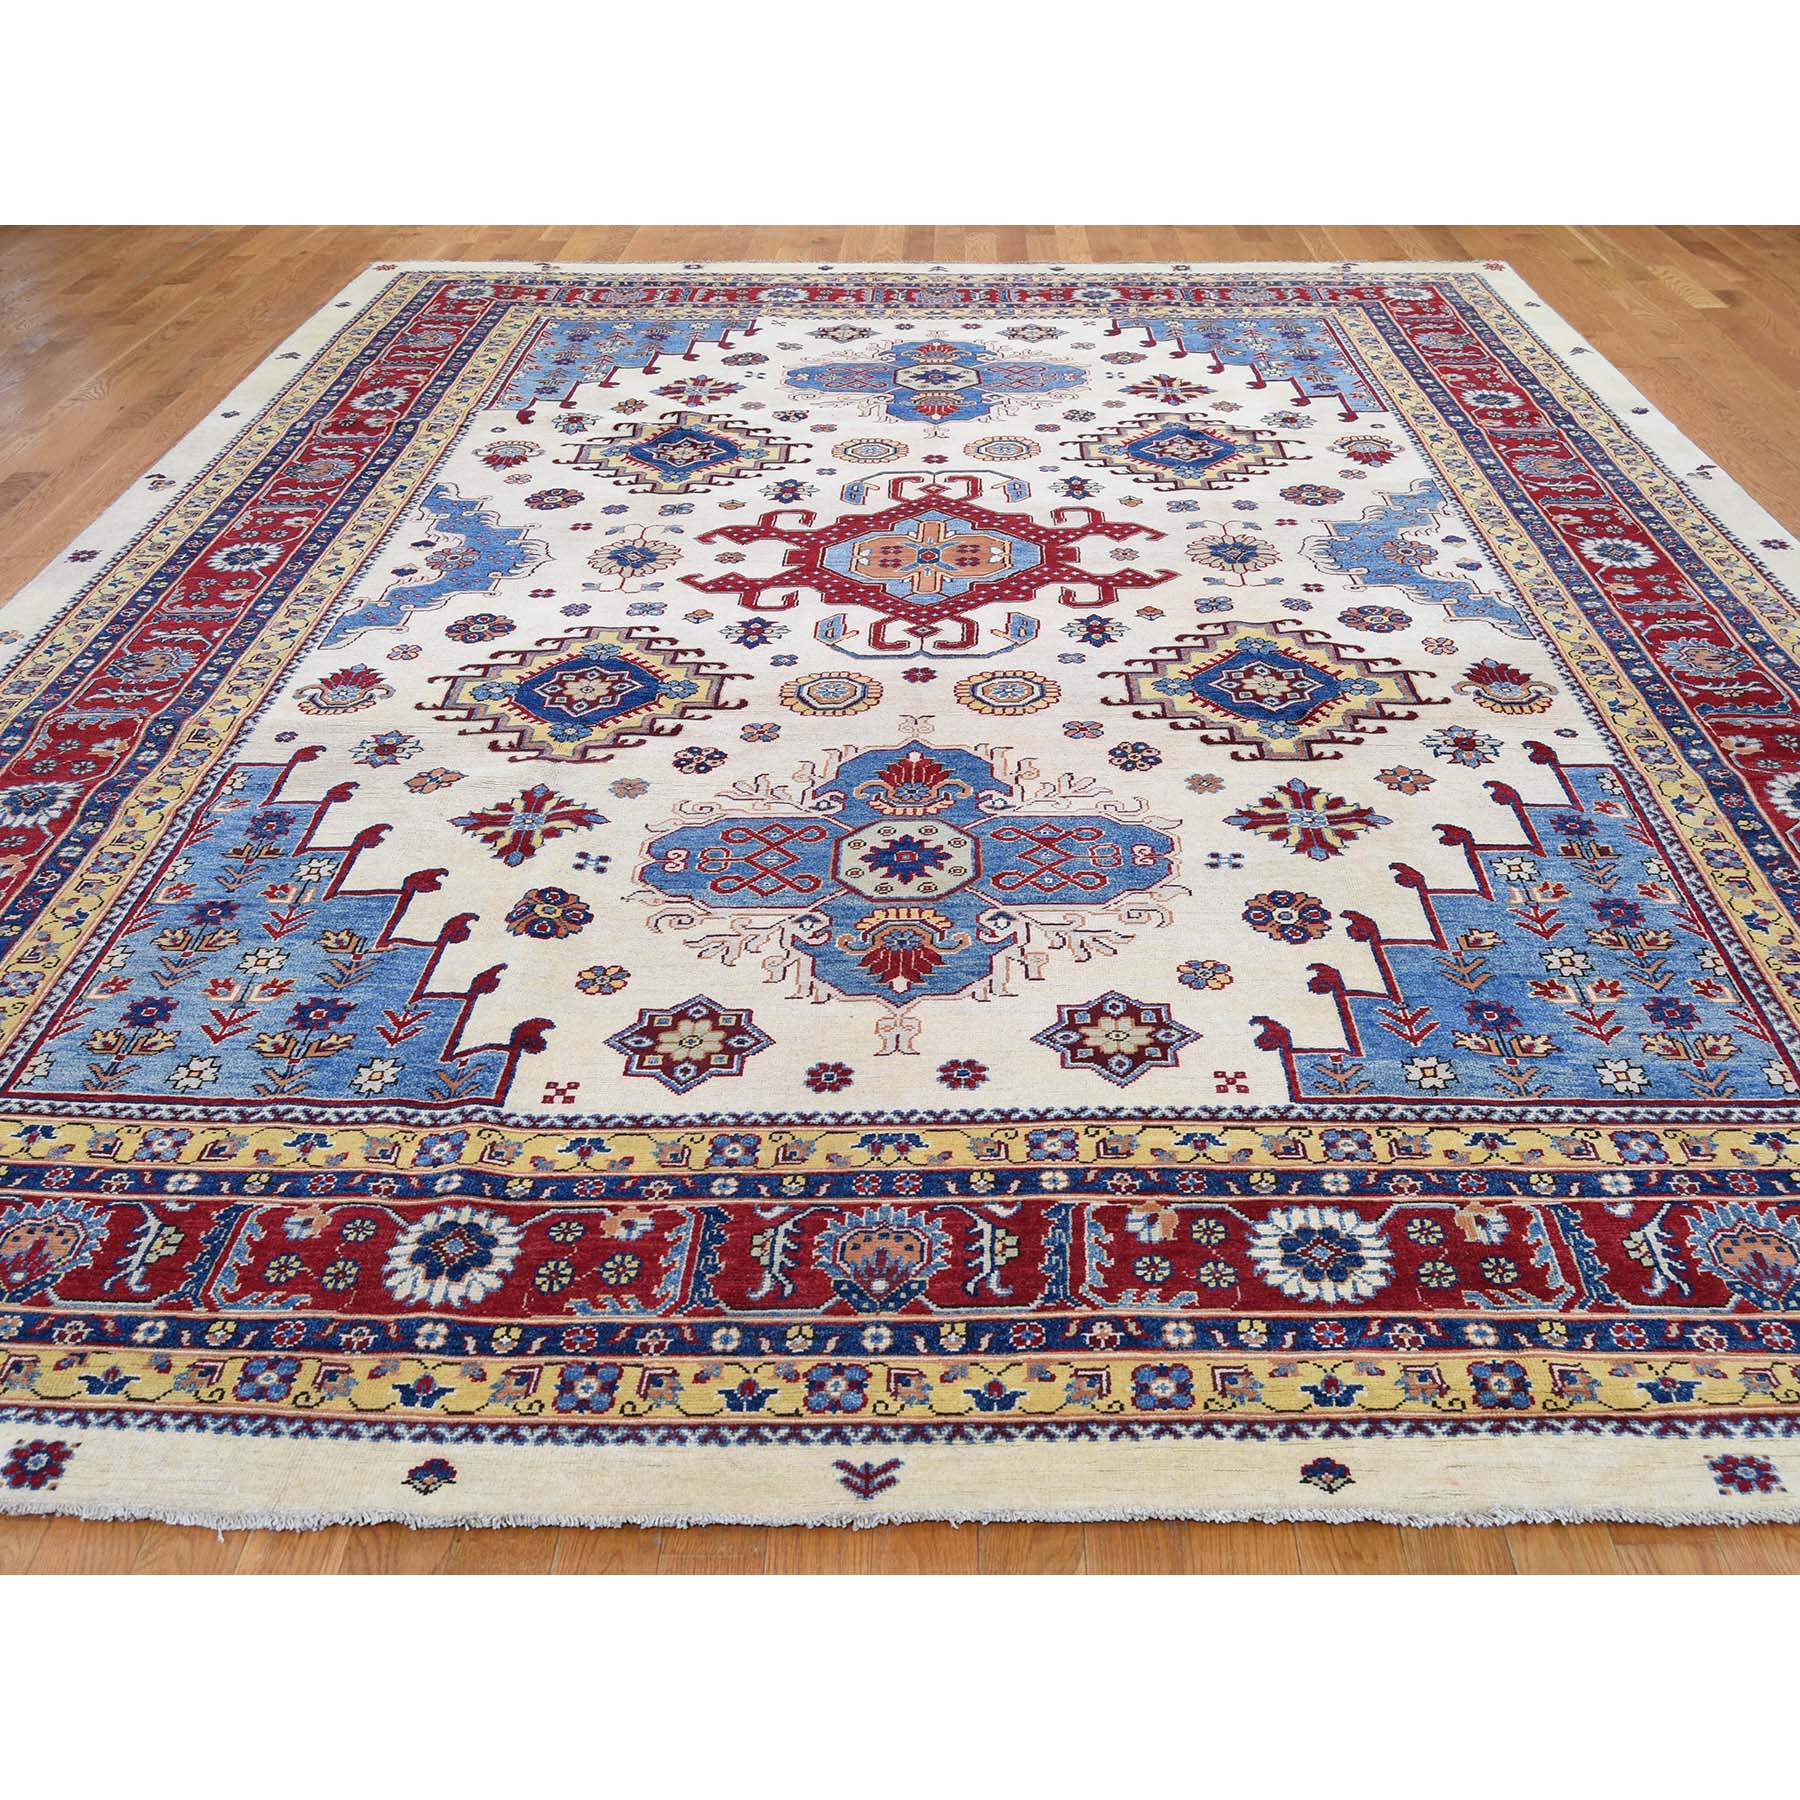 10-x13-3  Special Kazak Pure Wool Hand-Knotted Geometric Design Oriental Rug 